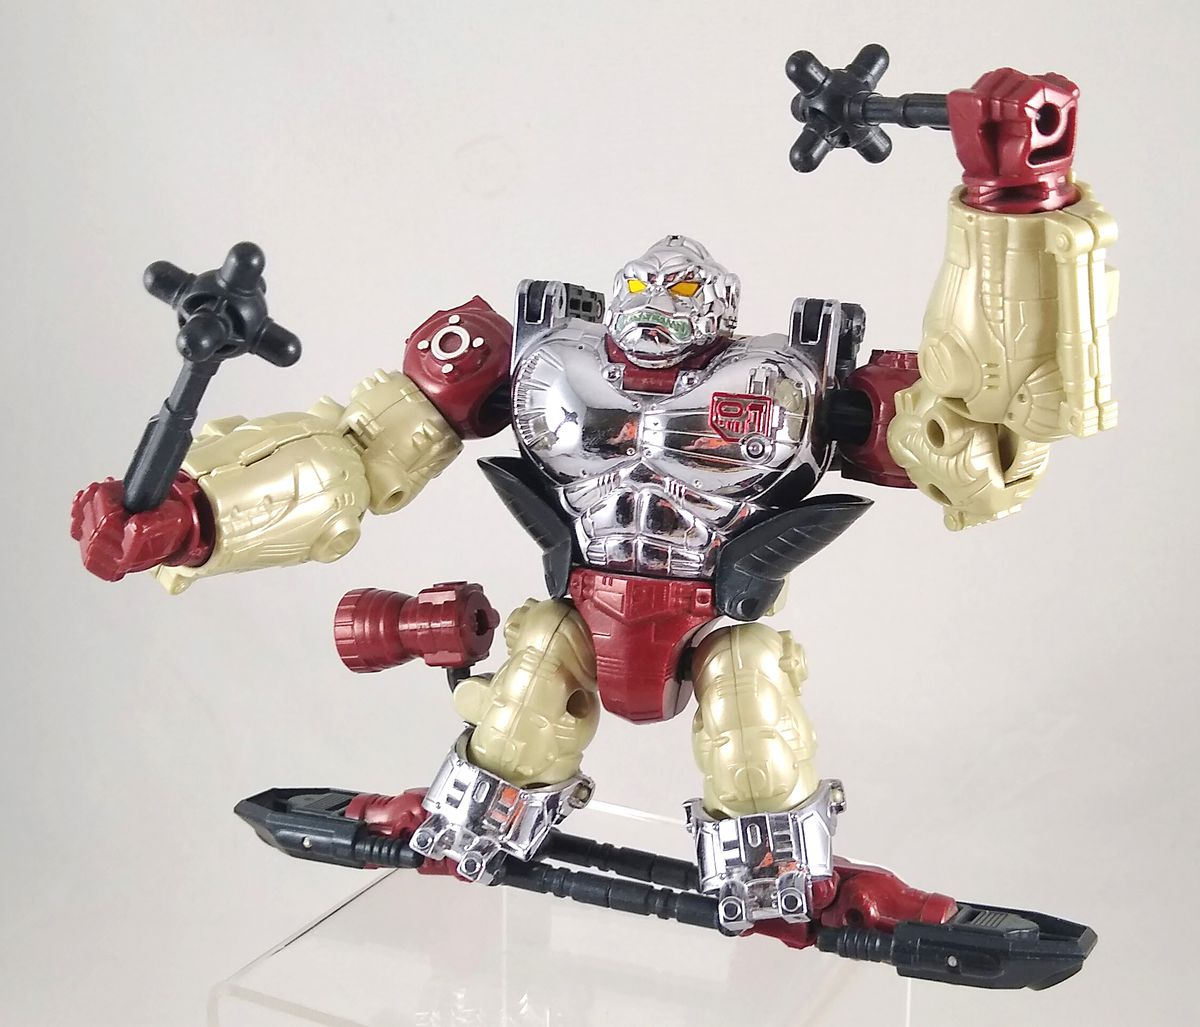 A photo of an Apelinq convention exclusive Transformers toy, a red, black, silver, and cream metal ape standing on a black hoverboard and wielding black maces